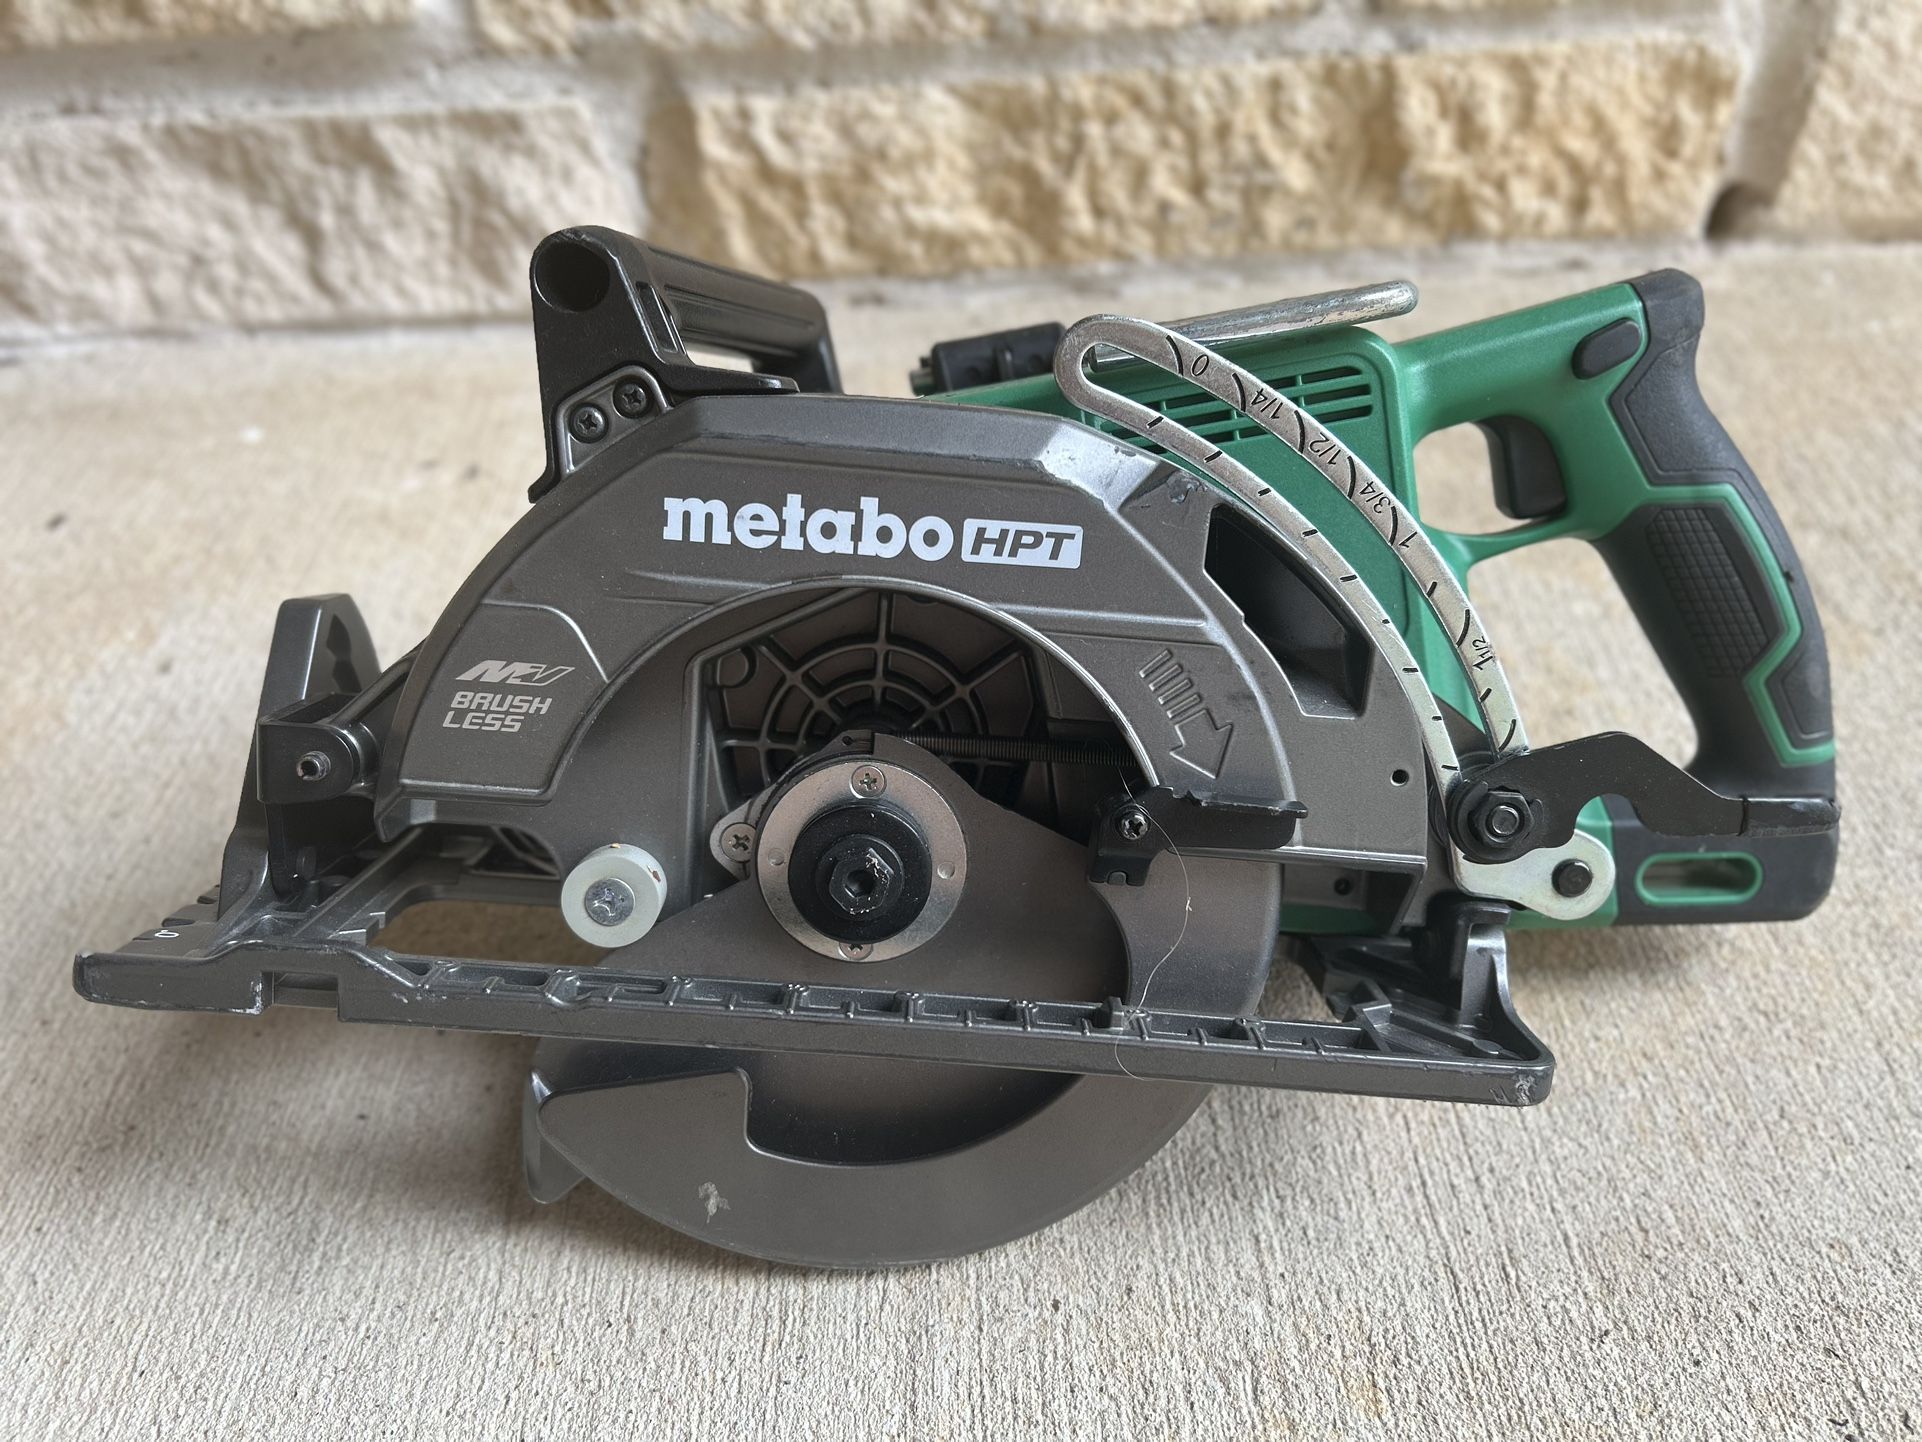 Metabo HPT C3607DWAQ4M 36V 7-1/4'' Cordless Rear Handle Saw (Tool Only) No Blade